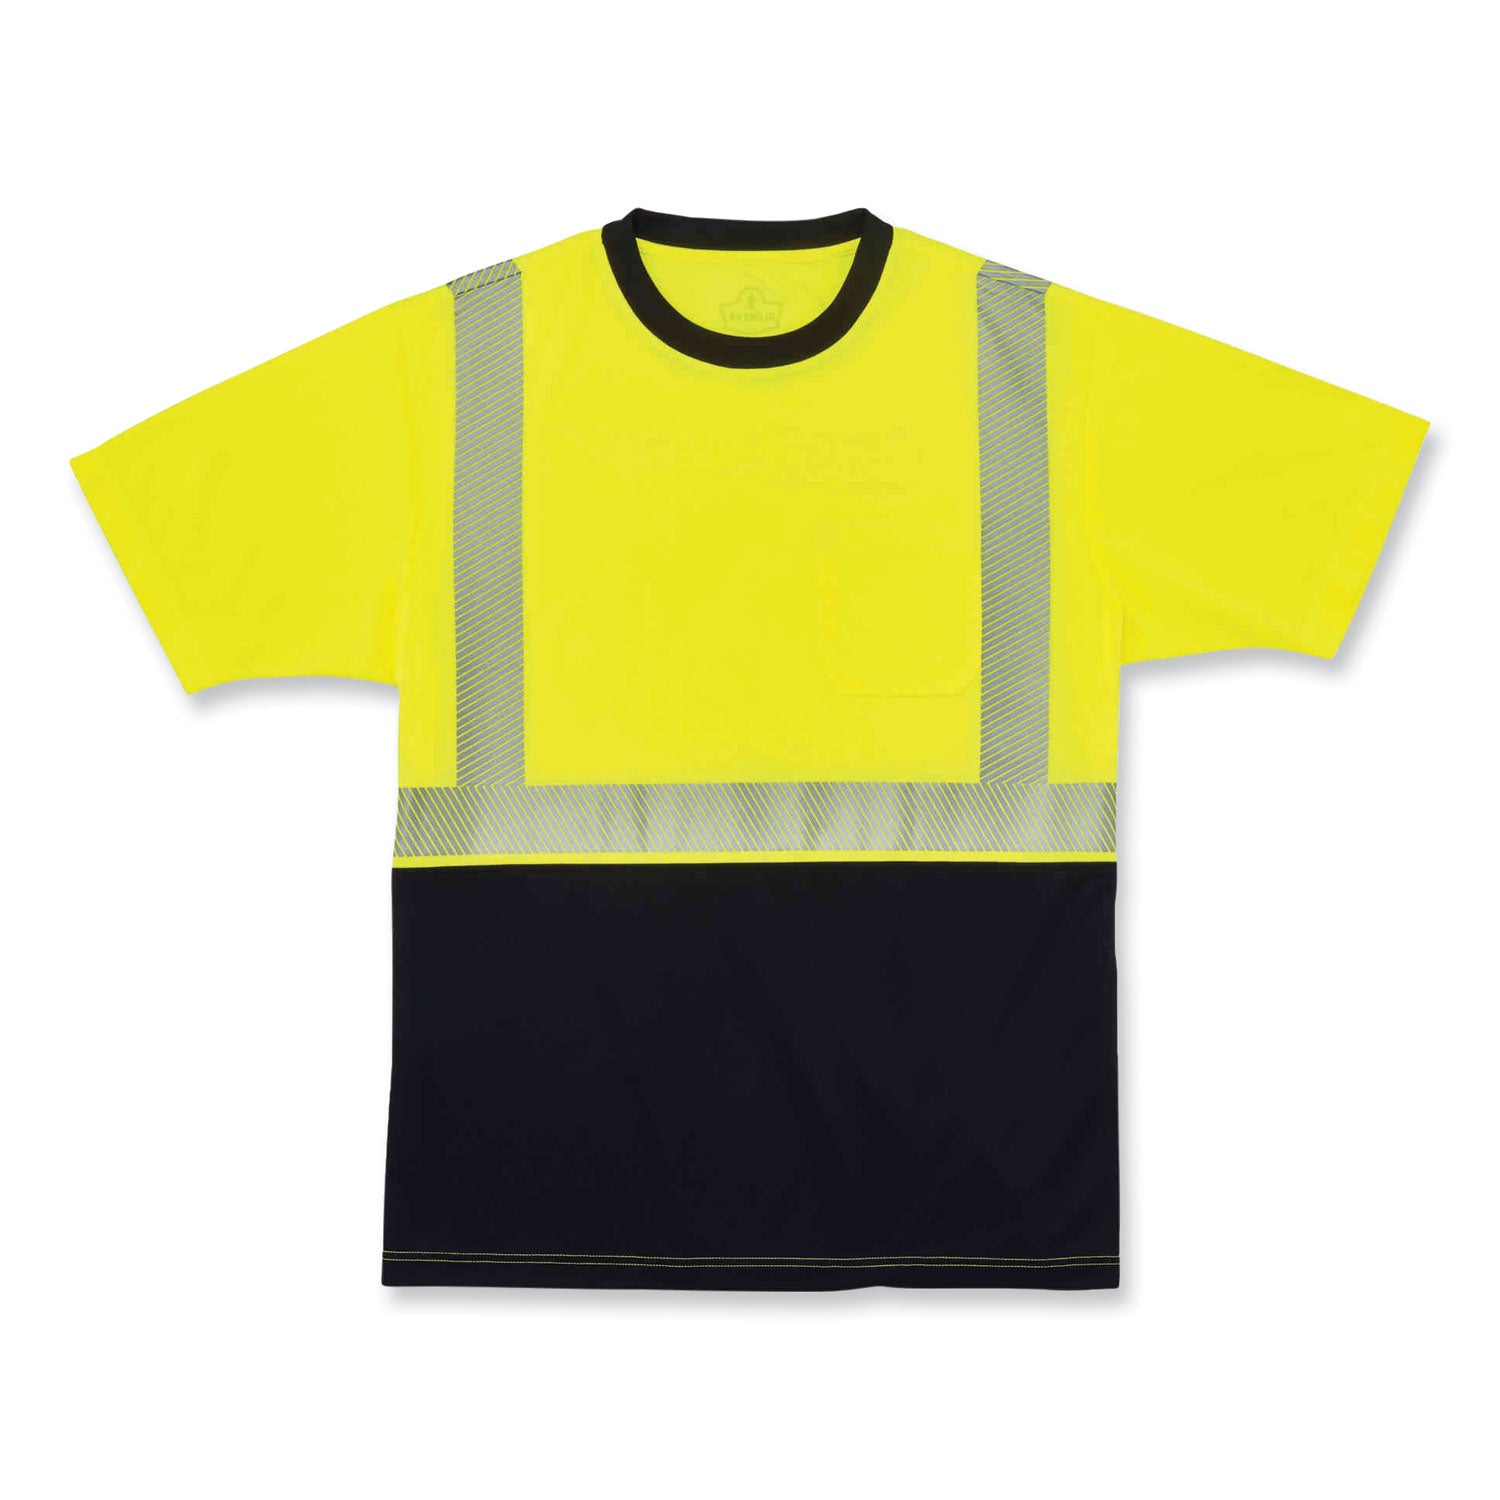 glowear-8280bk-class-2-performance-t-shirt-with-black-bottom-polyester-large-lime-ships-in-1-3-business-days_ego22534 - 2